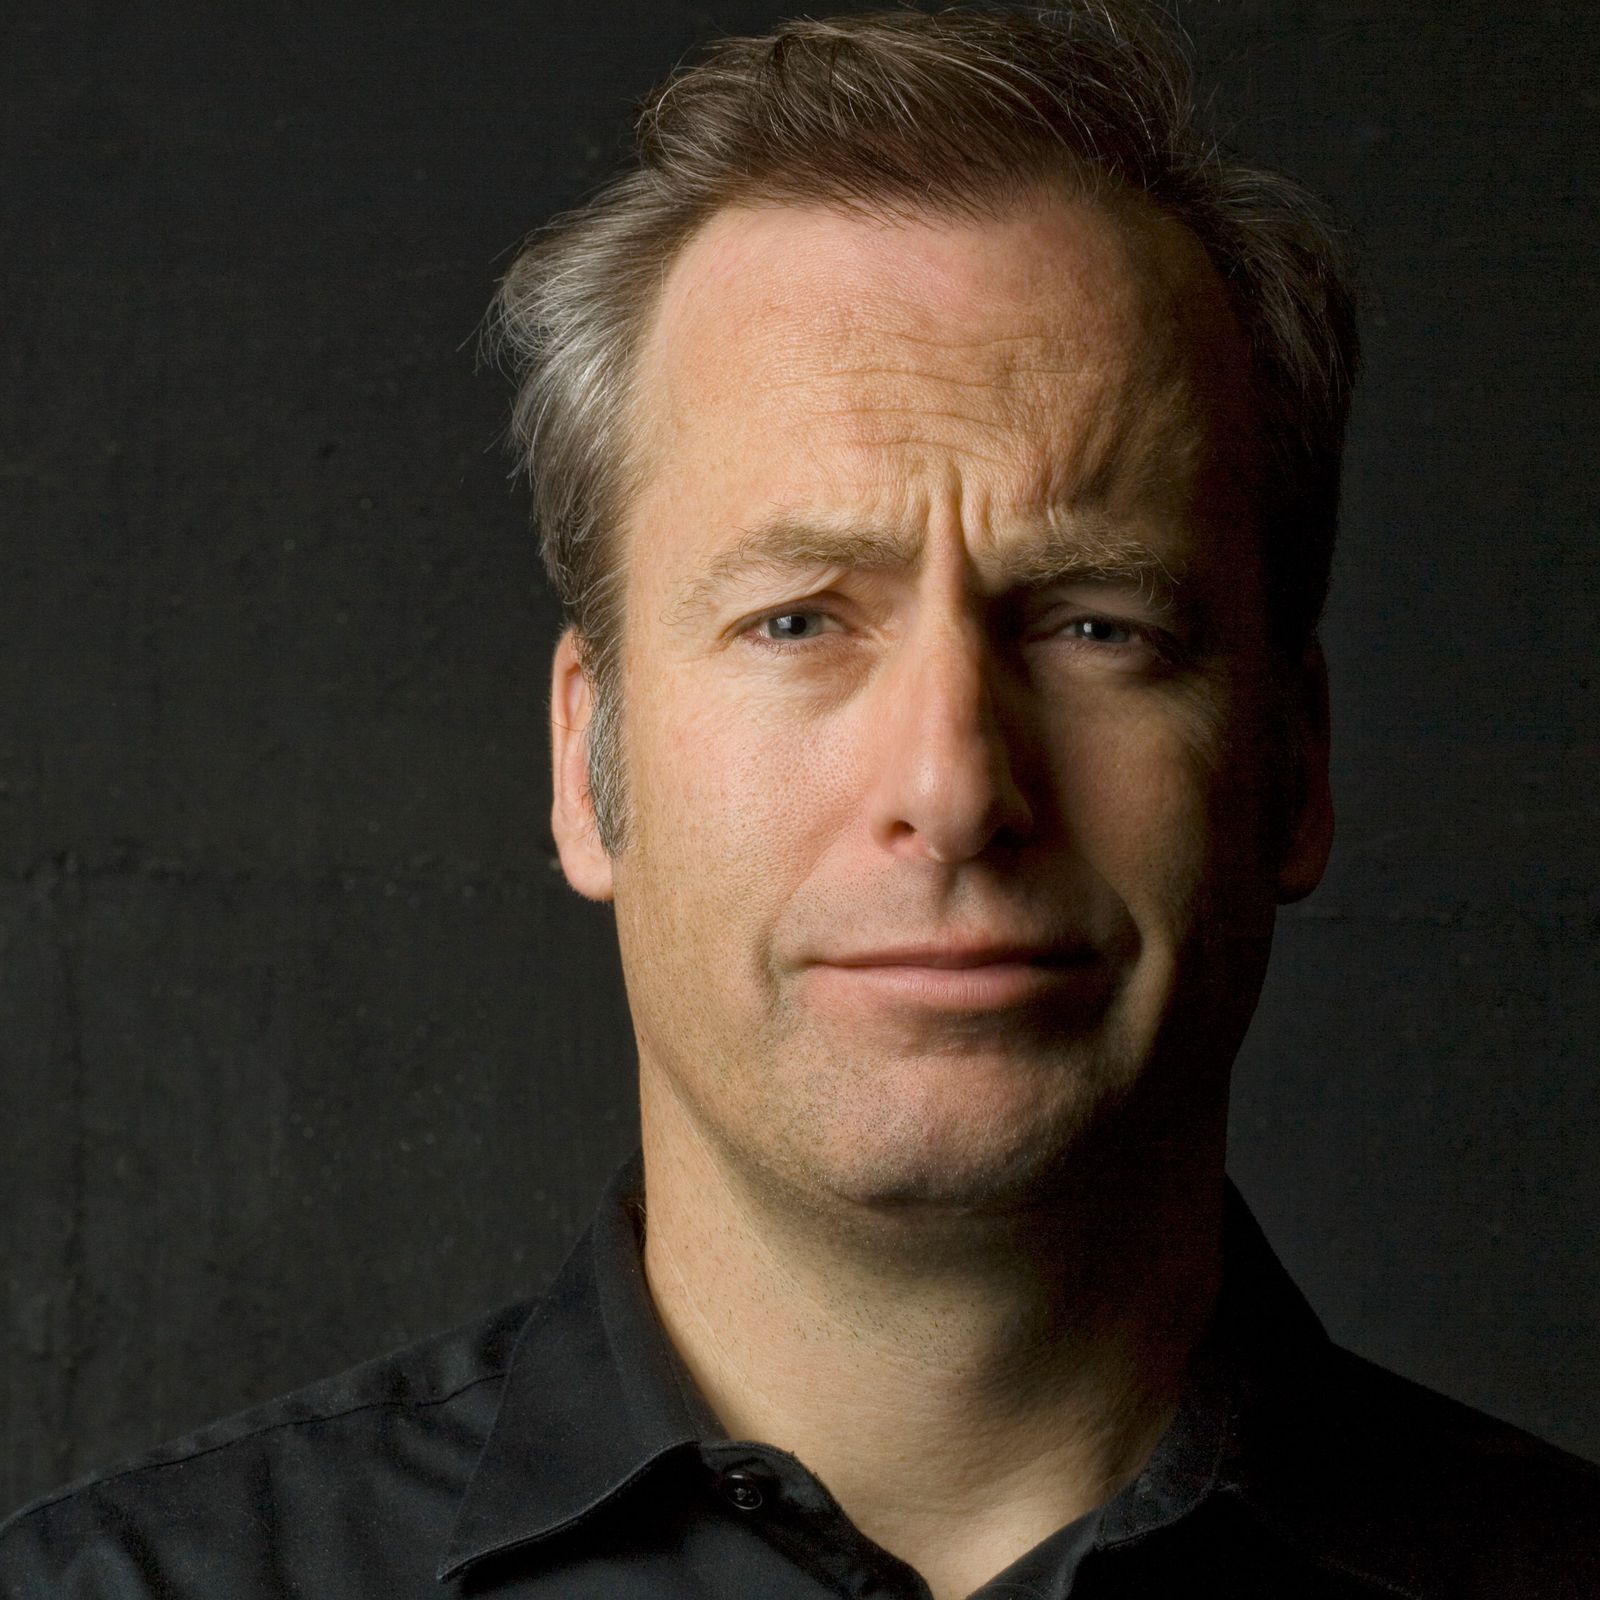 Bob Odenkirk To Star And Produce Action Thriller ‘Nobody’